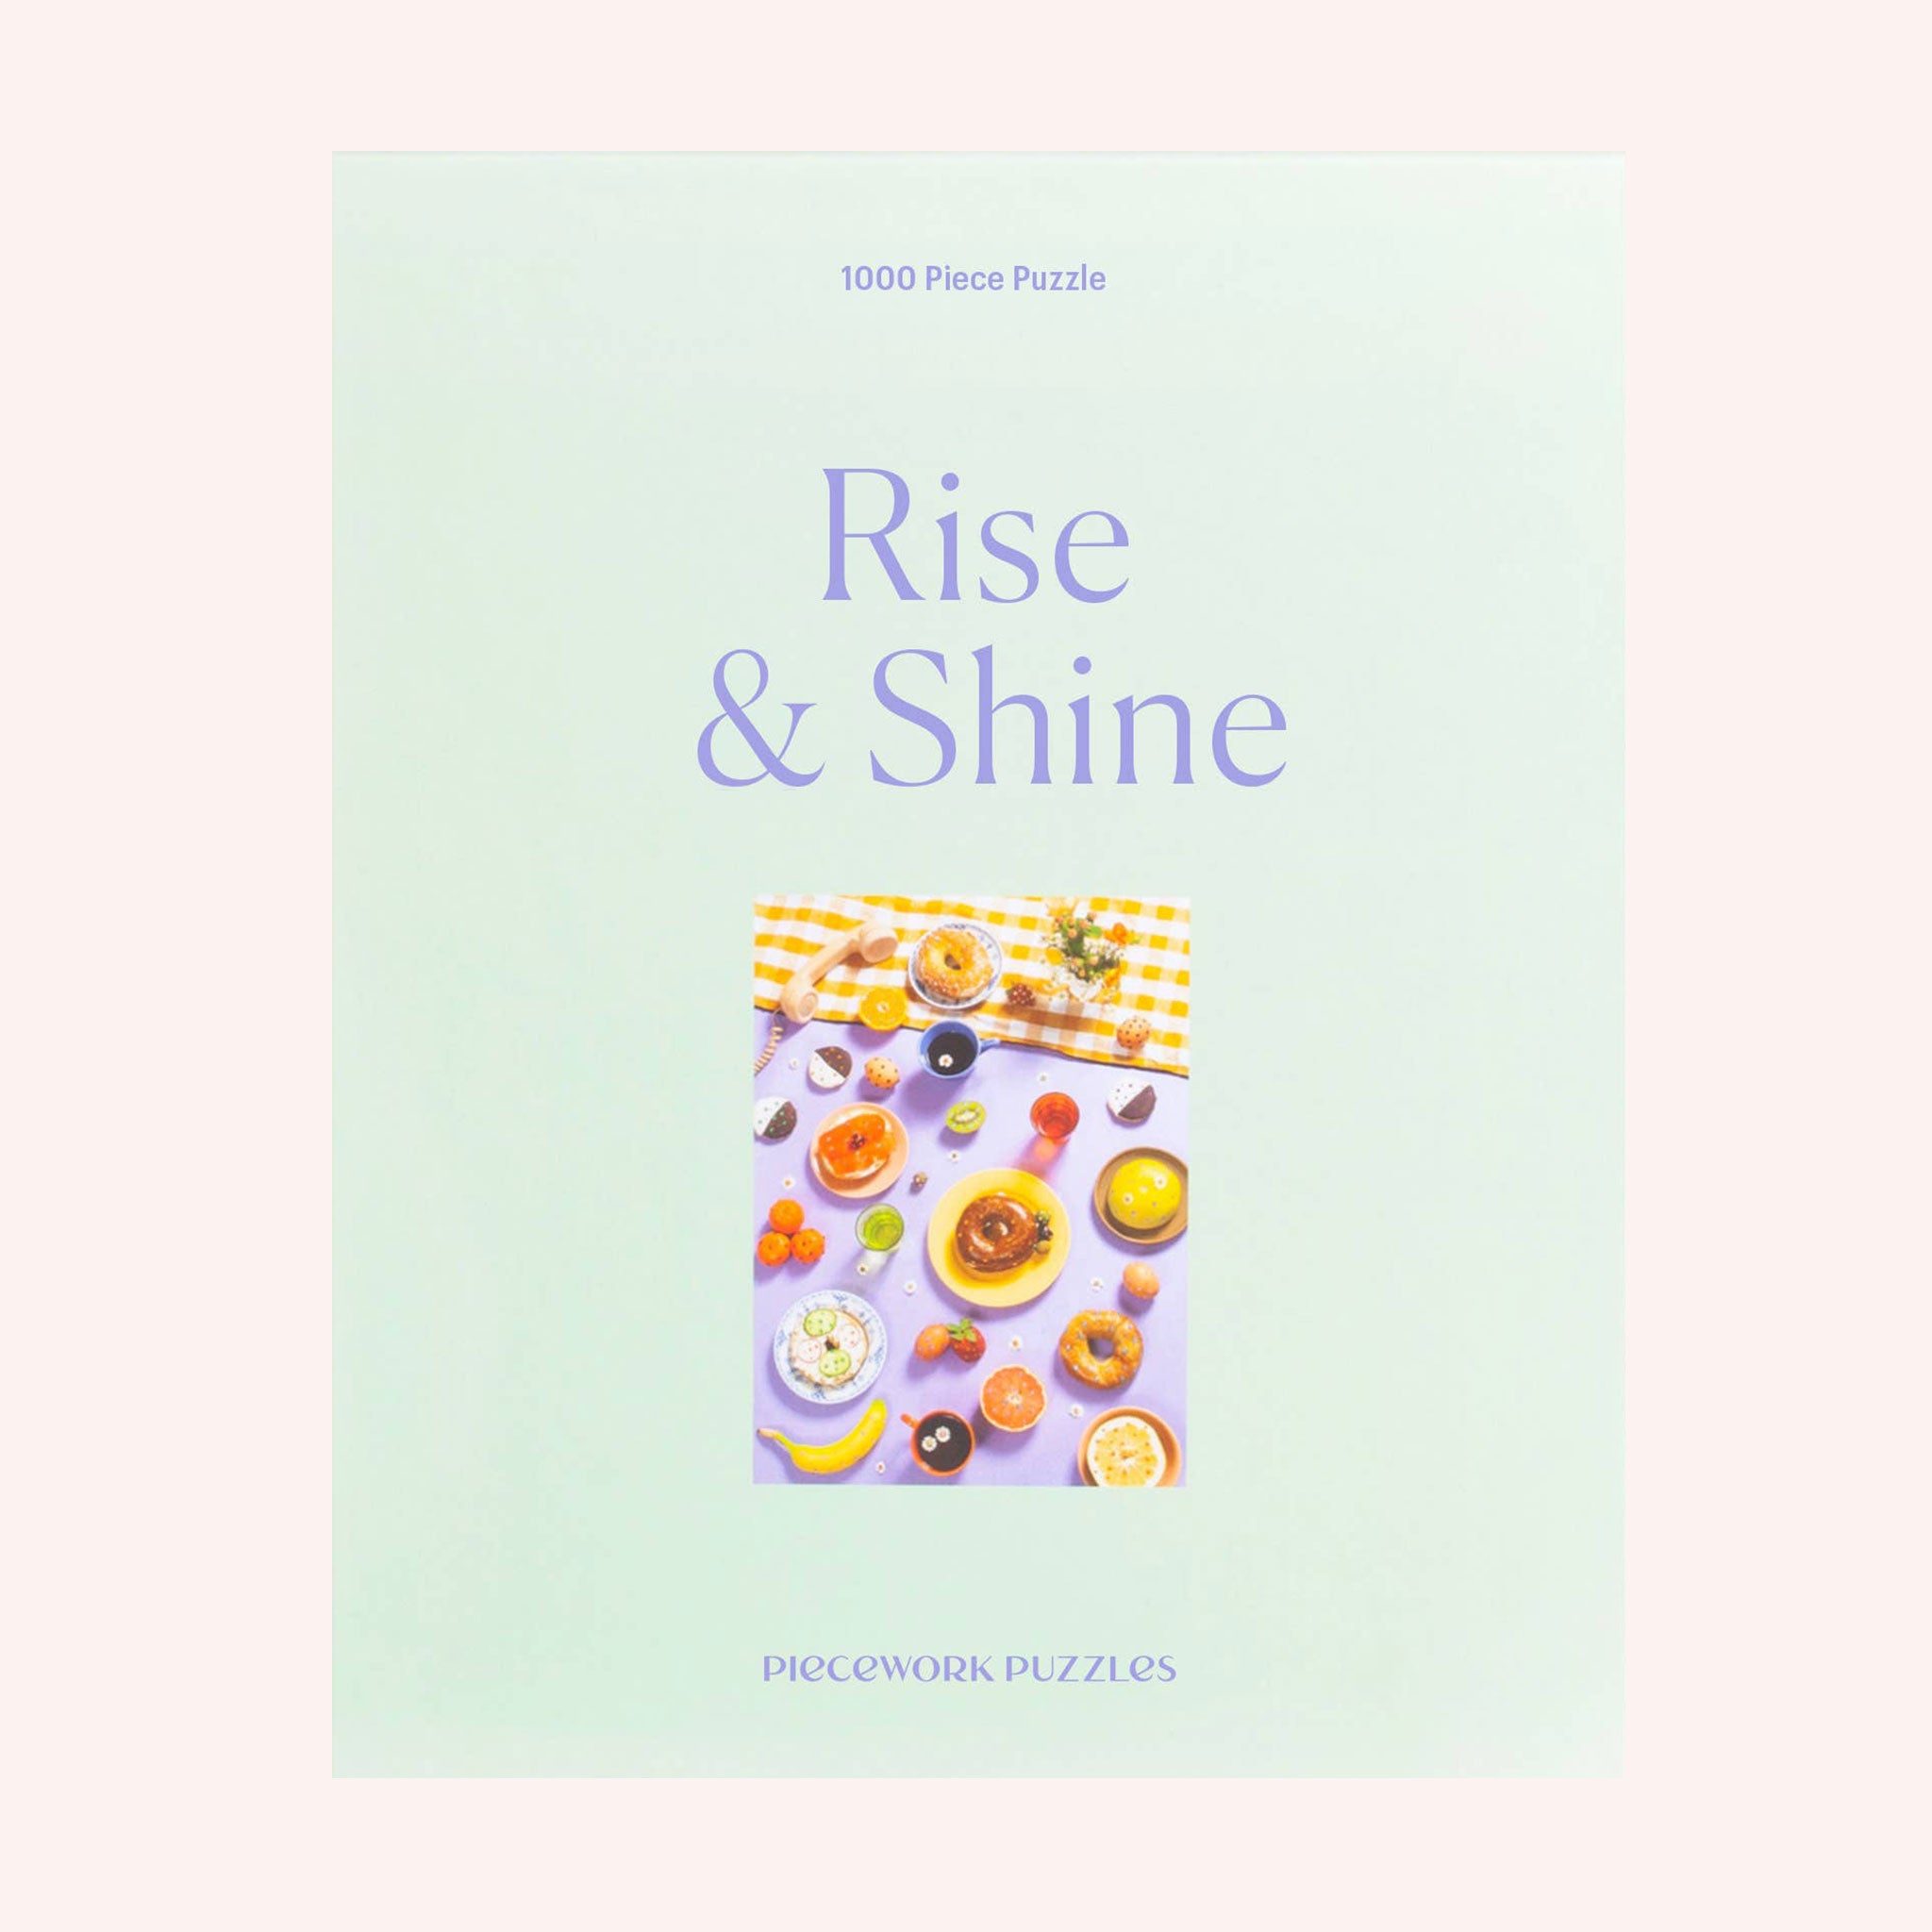 A mint green cardboard boxed puzzle with the words &quot;Rise &amp; Shine&quot; in a light purple text along with an image of an array of bedazzled breakfast items including bagels, fruits, sunny side up eggs and more.